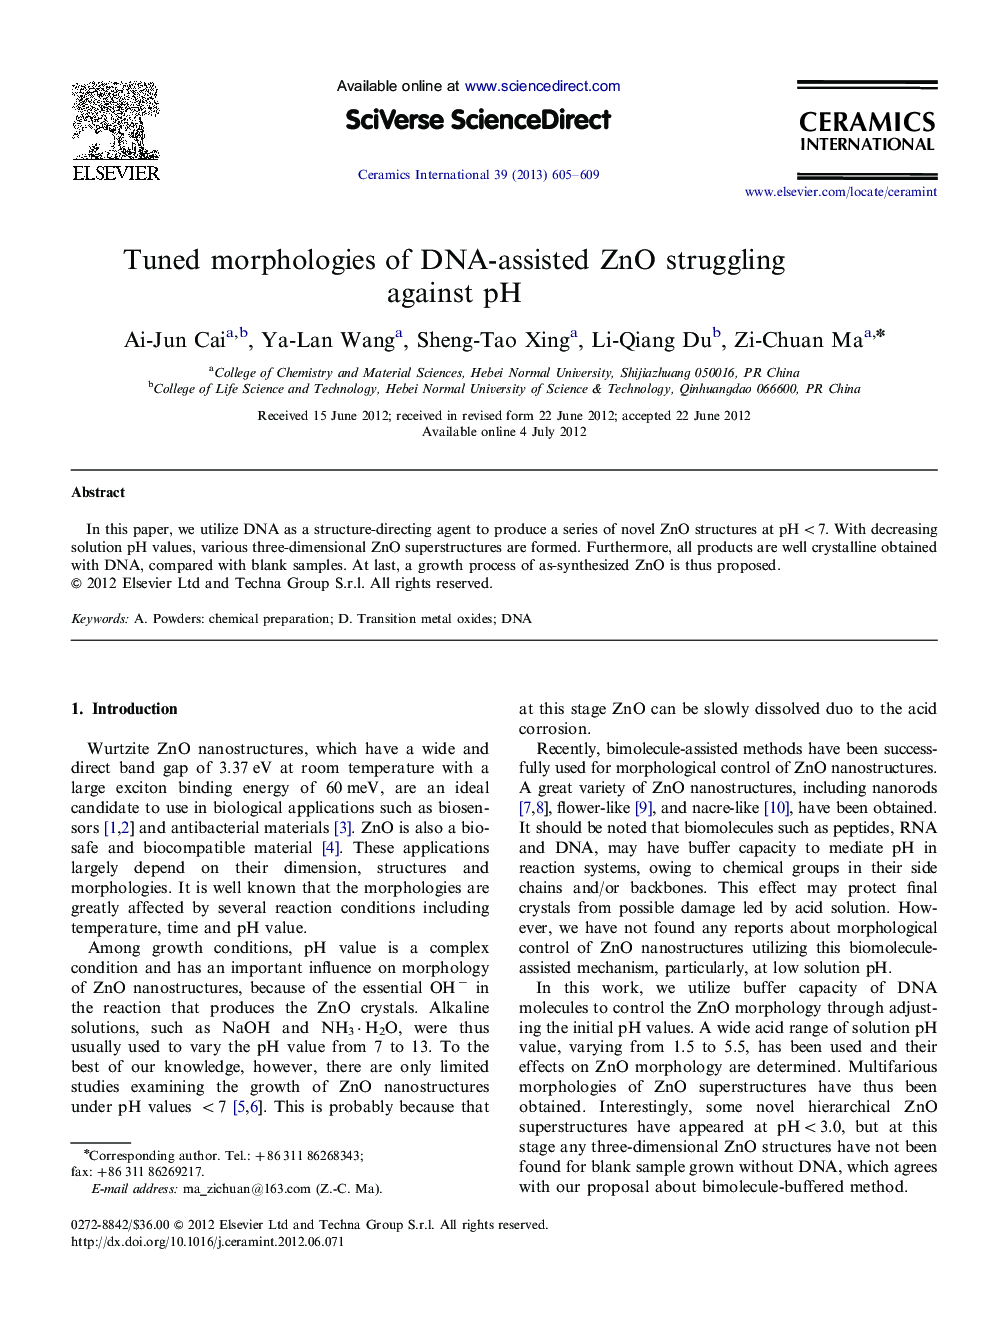 Tuned morphologies of DNA-assisted ZnO struggling against pH